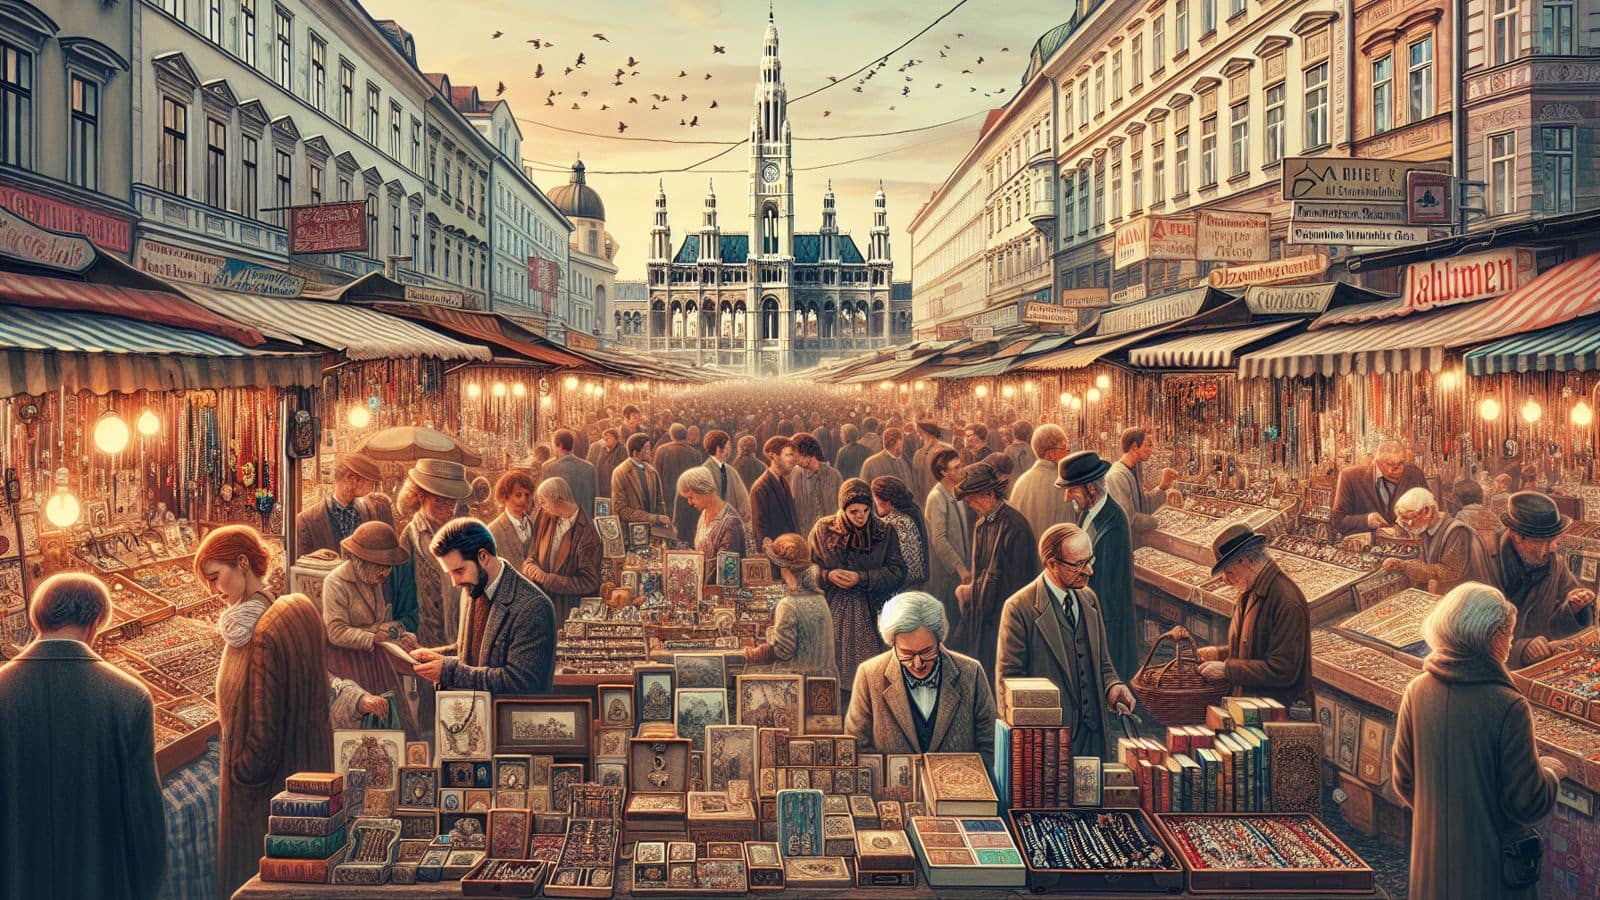 Add Vienna's vintage antique market treasures to your itinerary